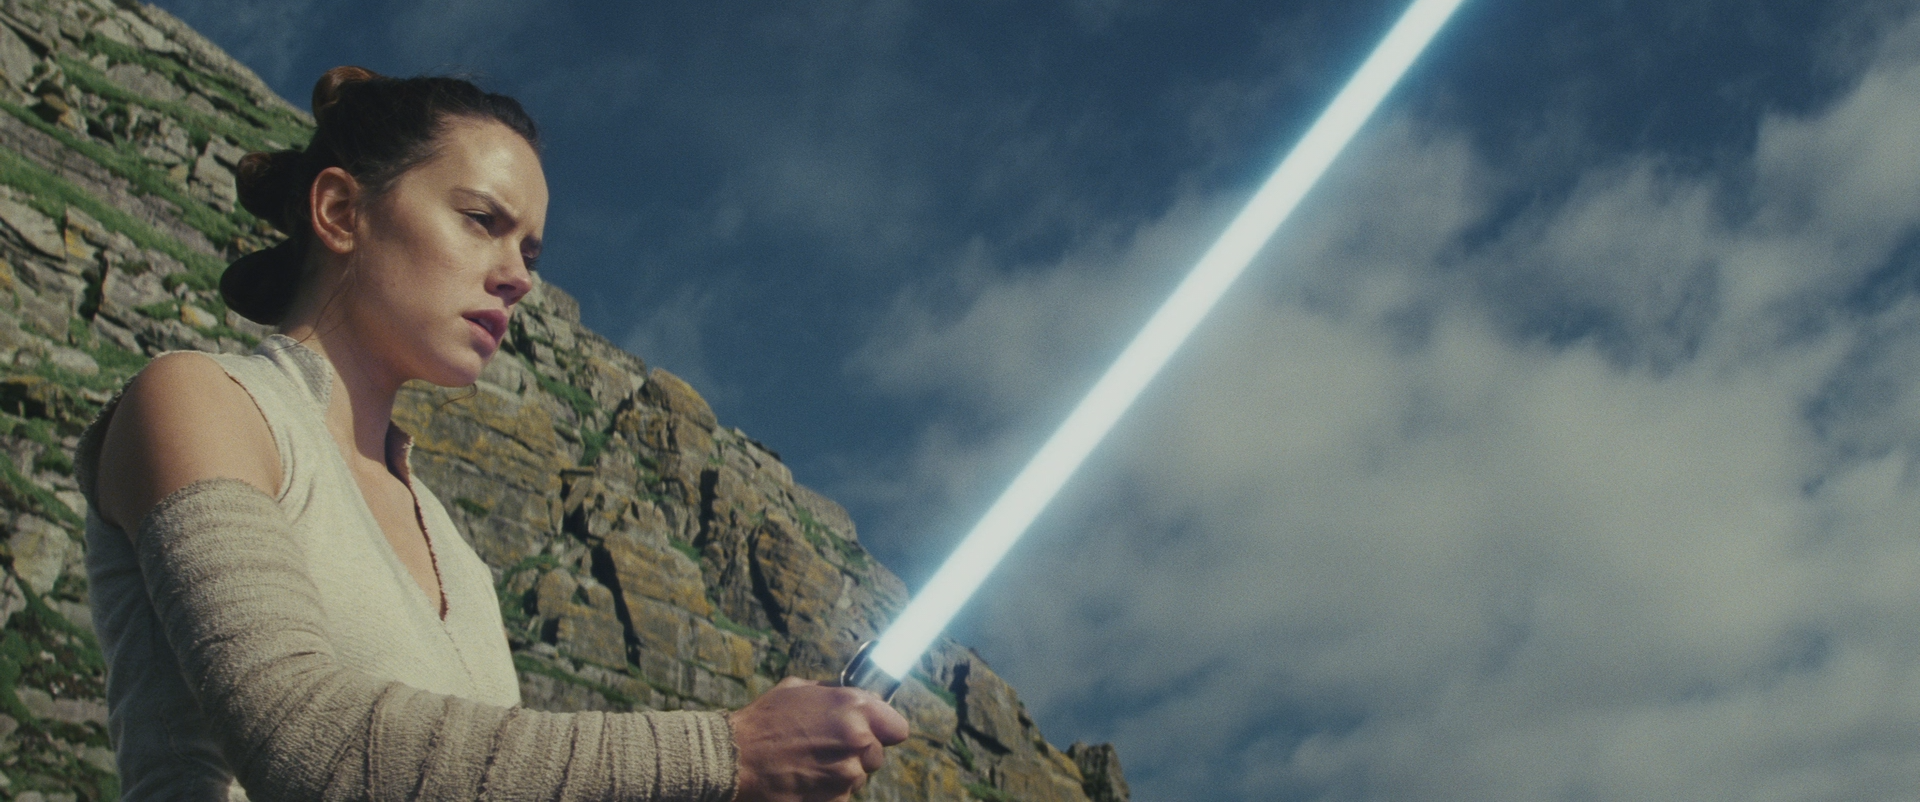 All The Secrets About The Battles To Come Hidden In The New Star Wars: The Last Jedi Trailer